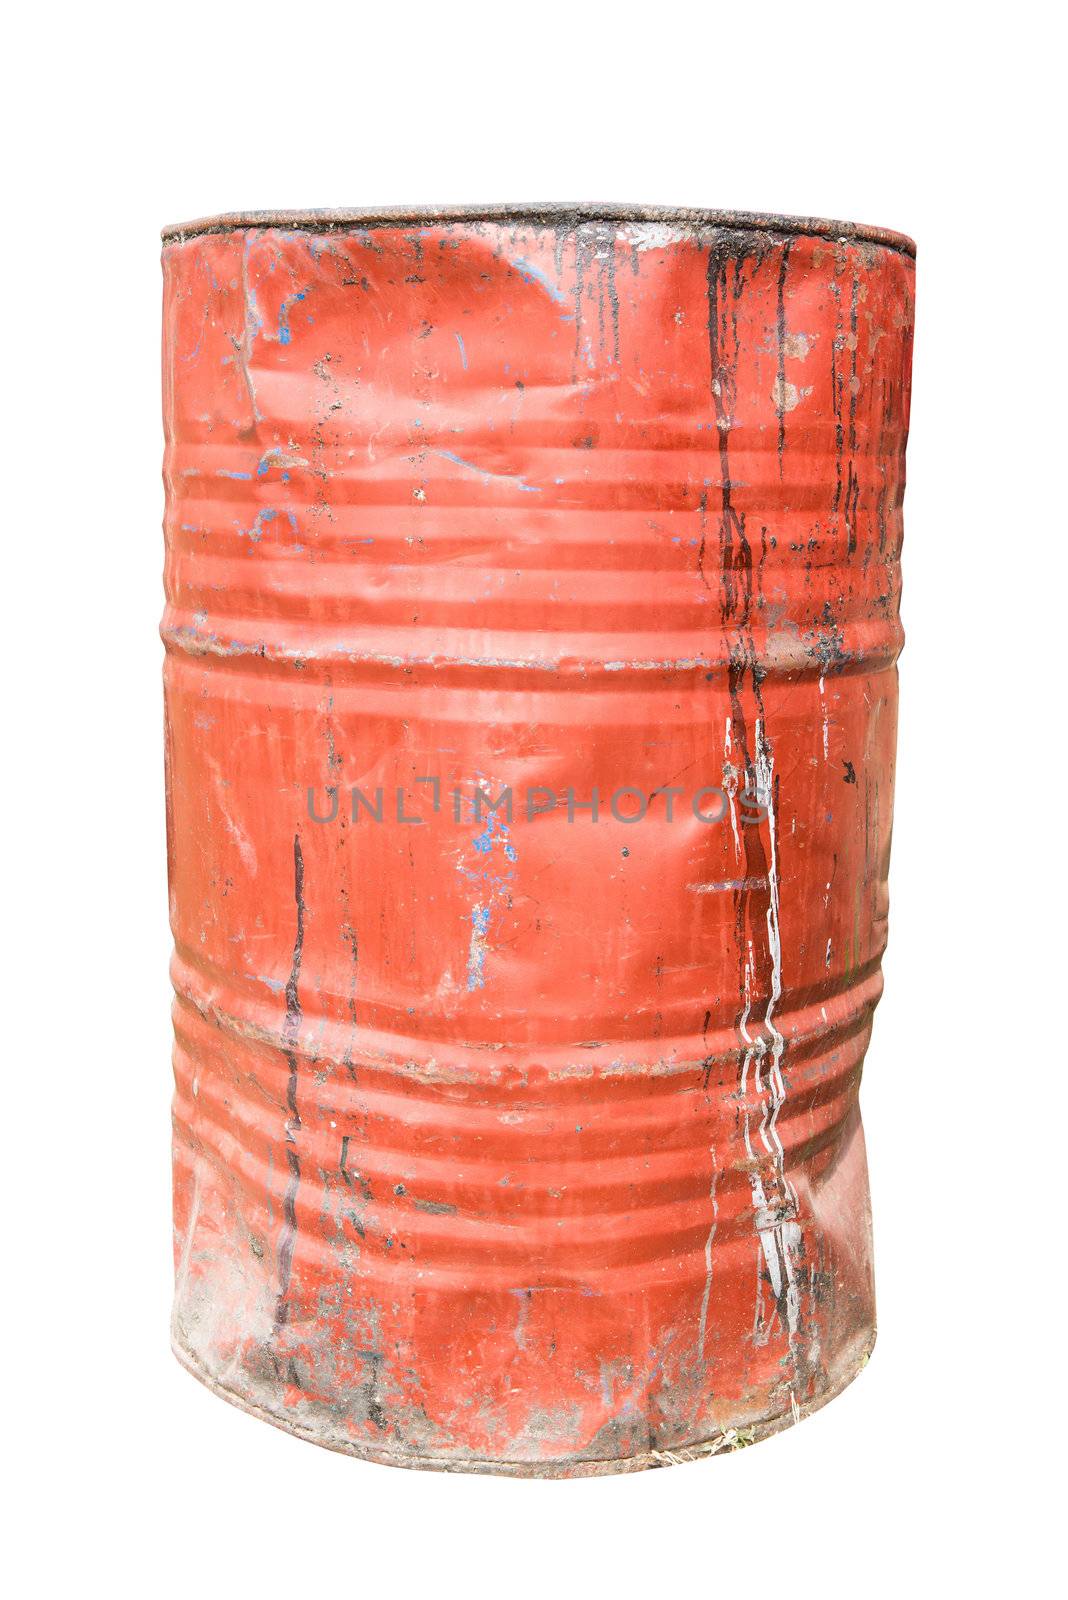 Red dirty rusty and damaged oil drum by sasilsolutions